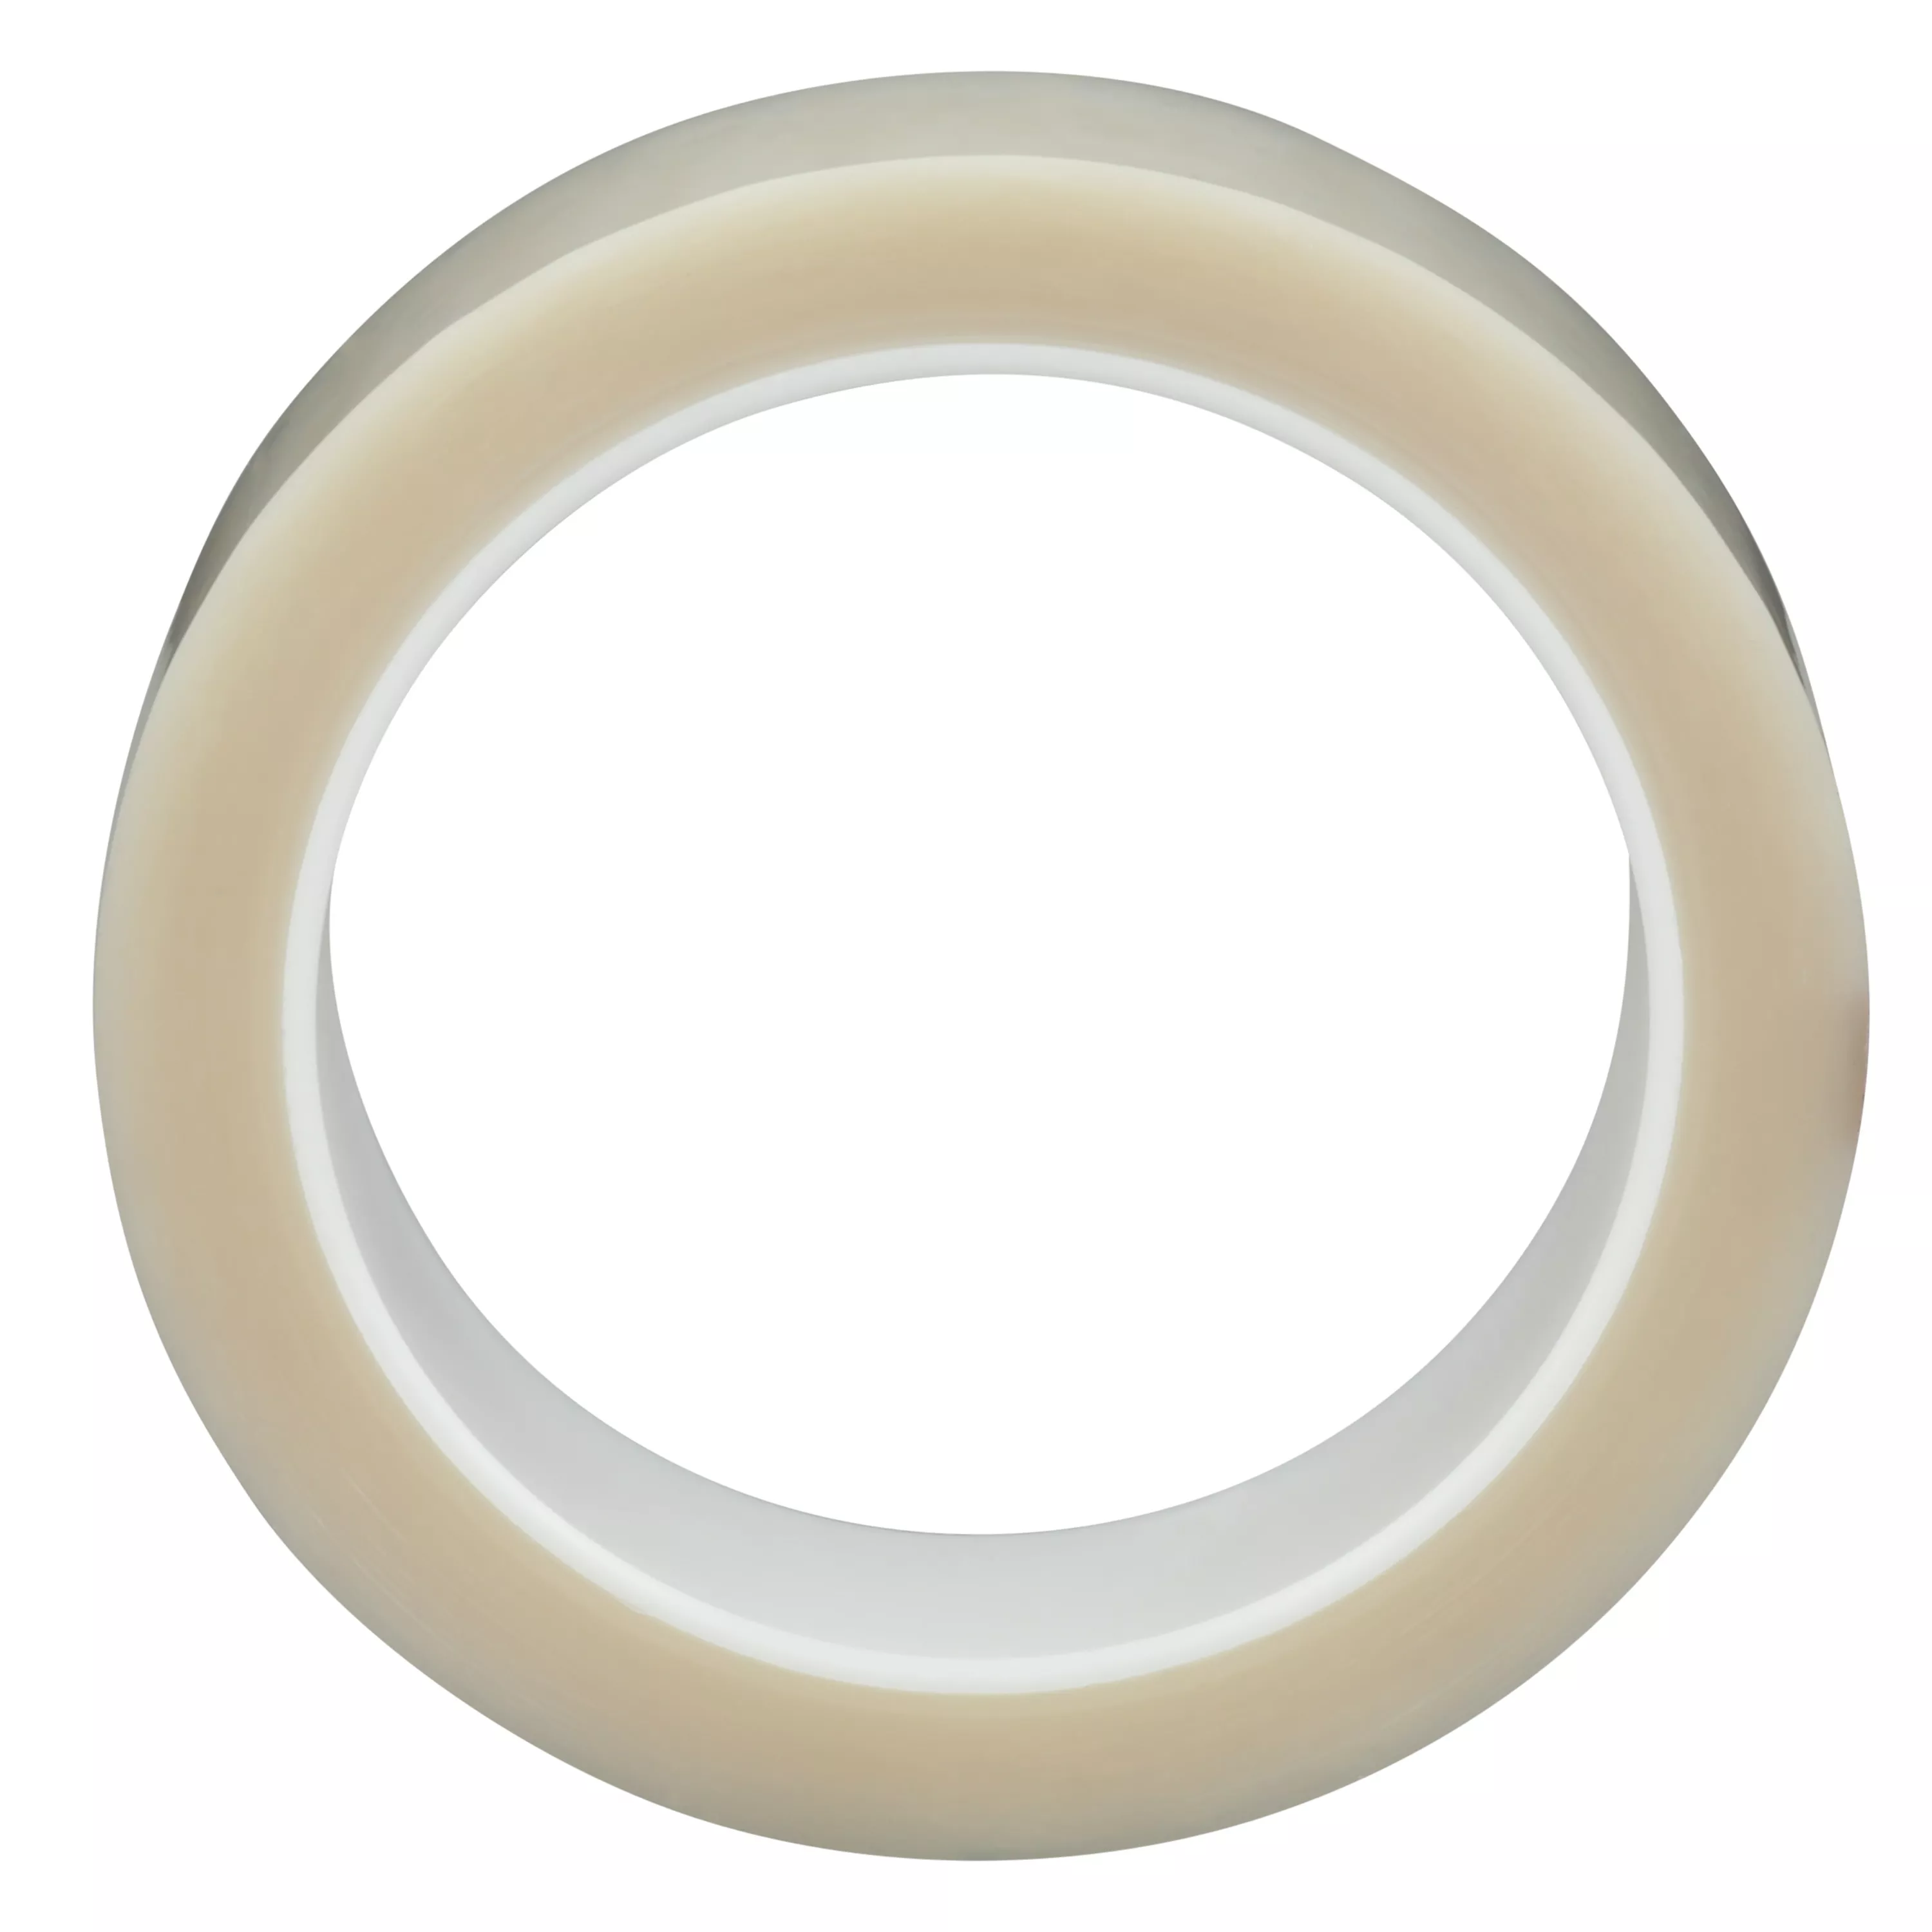 Product Number 850 | 3M™ Polyester Film Tape 850